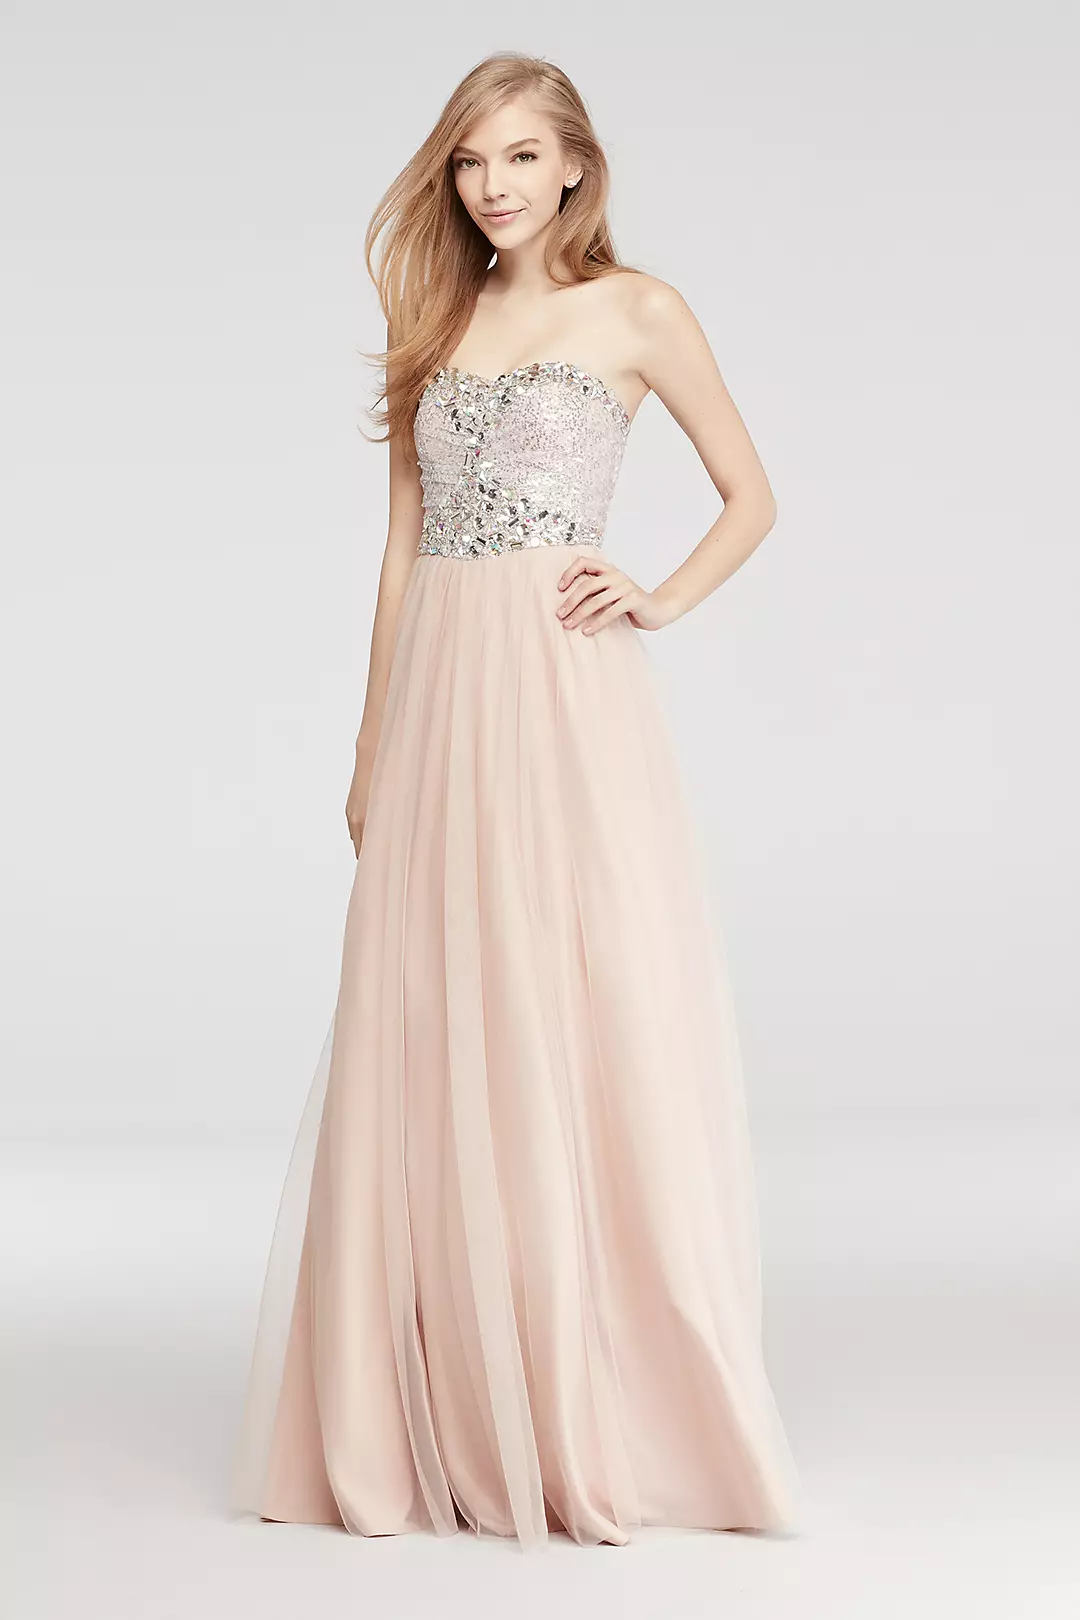 Strapless Prom Dress with Sequin Beaded Bodice Image